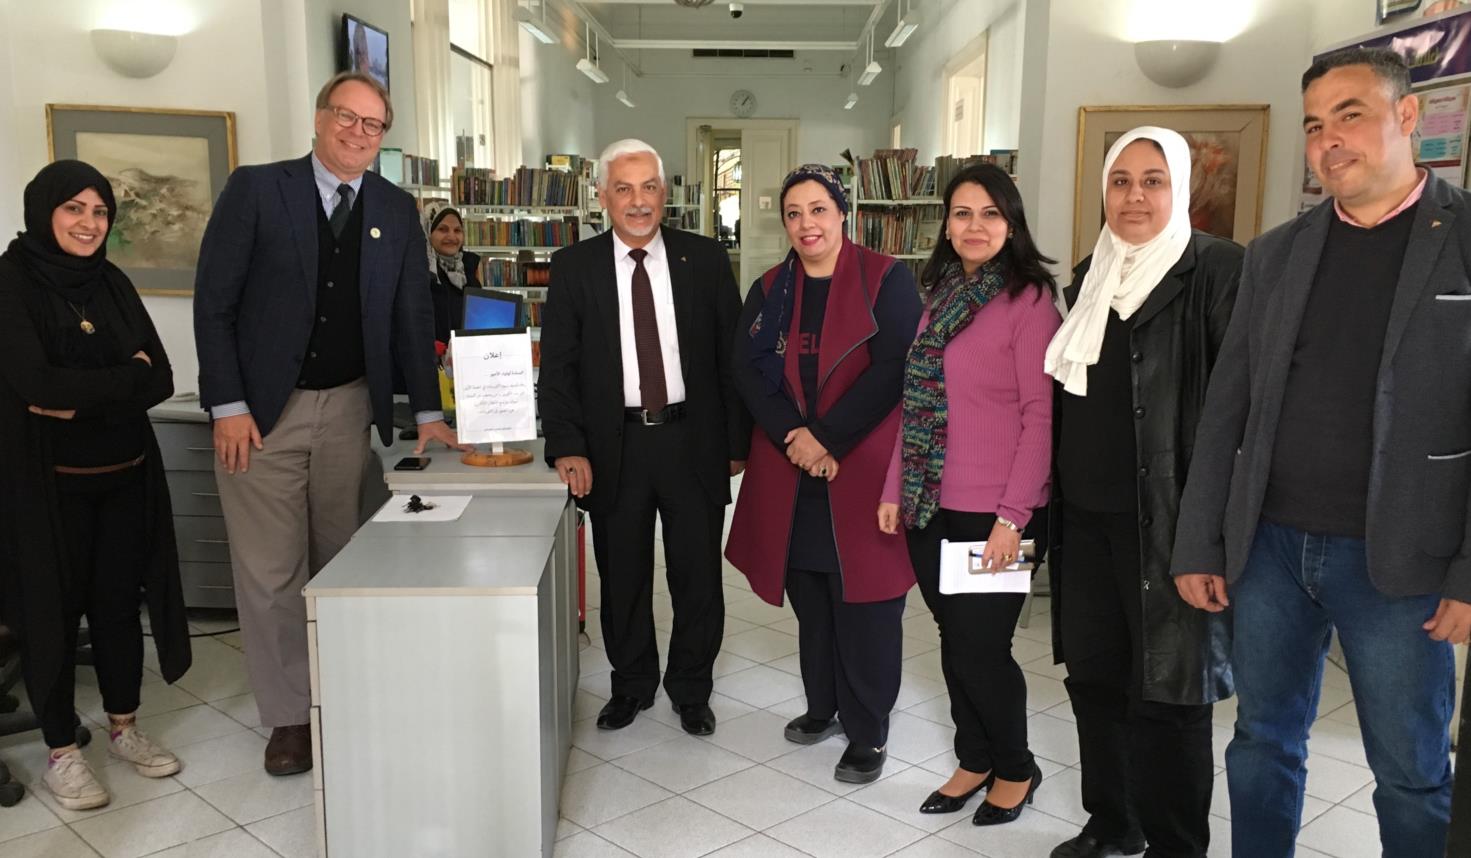 Patrick Plonski with Misr Public Library officials in Cairo, Egypt